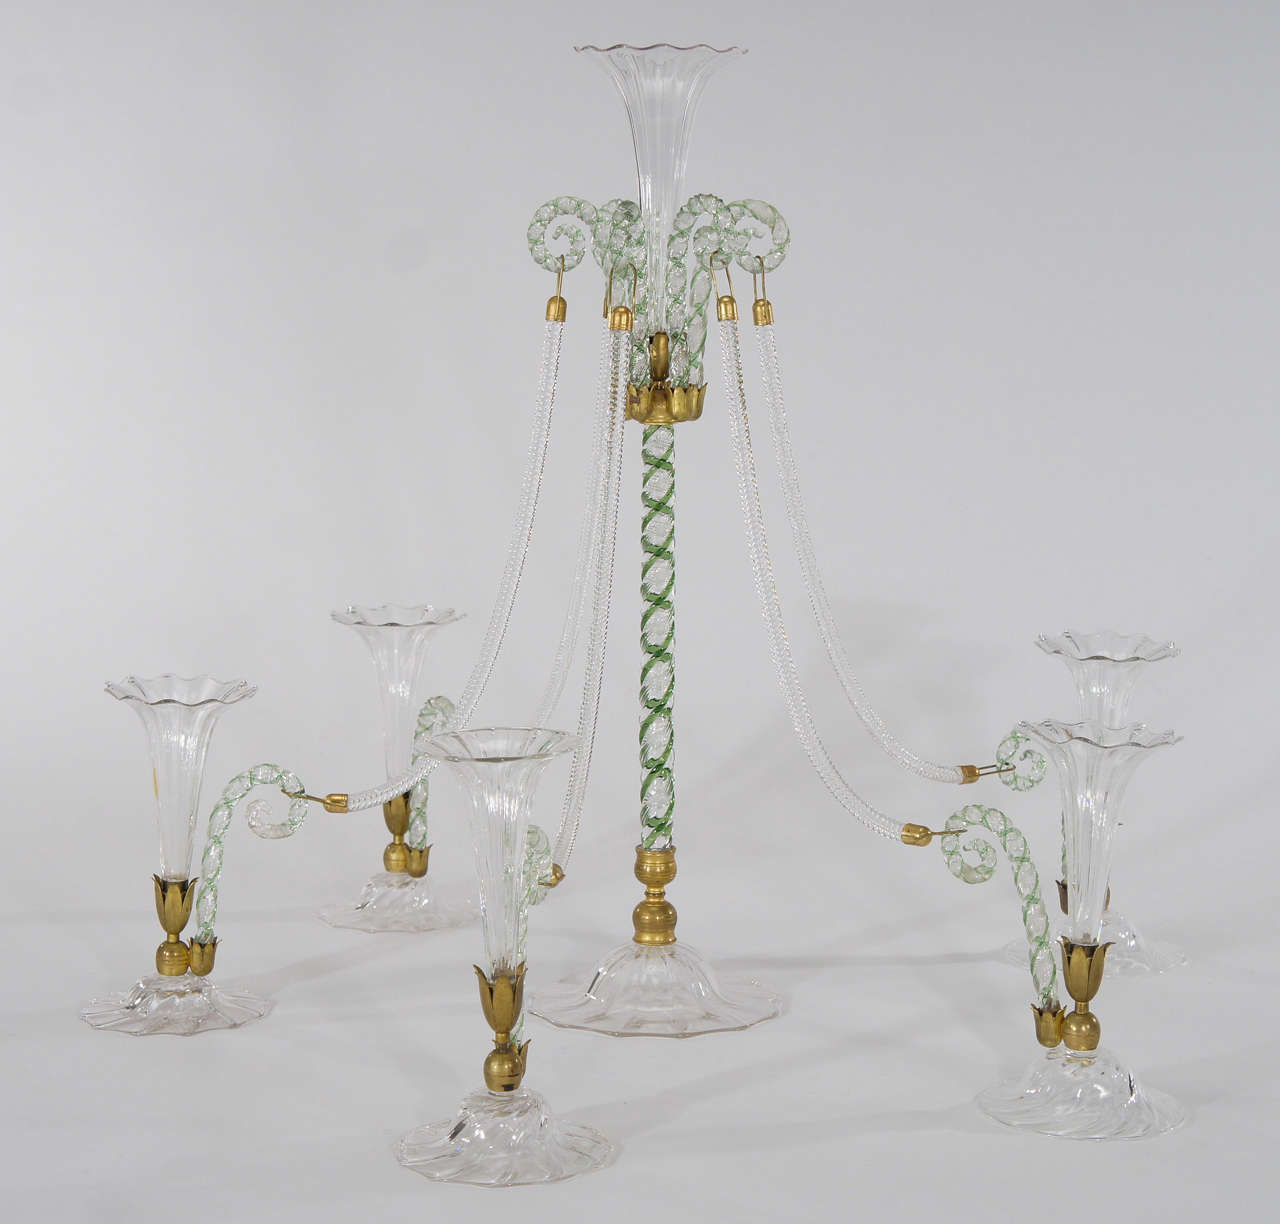 This is a custom made, perhaps unique hand blown epergne.  Made by either Stevens and Williams or Webb it has all the bells and whistles of an exceptional piece. It arrives in a fitted custom order box with the original owner's armorial crest. This